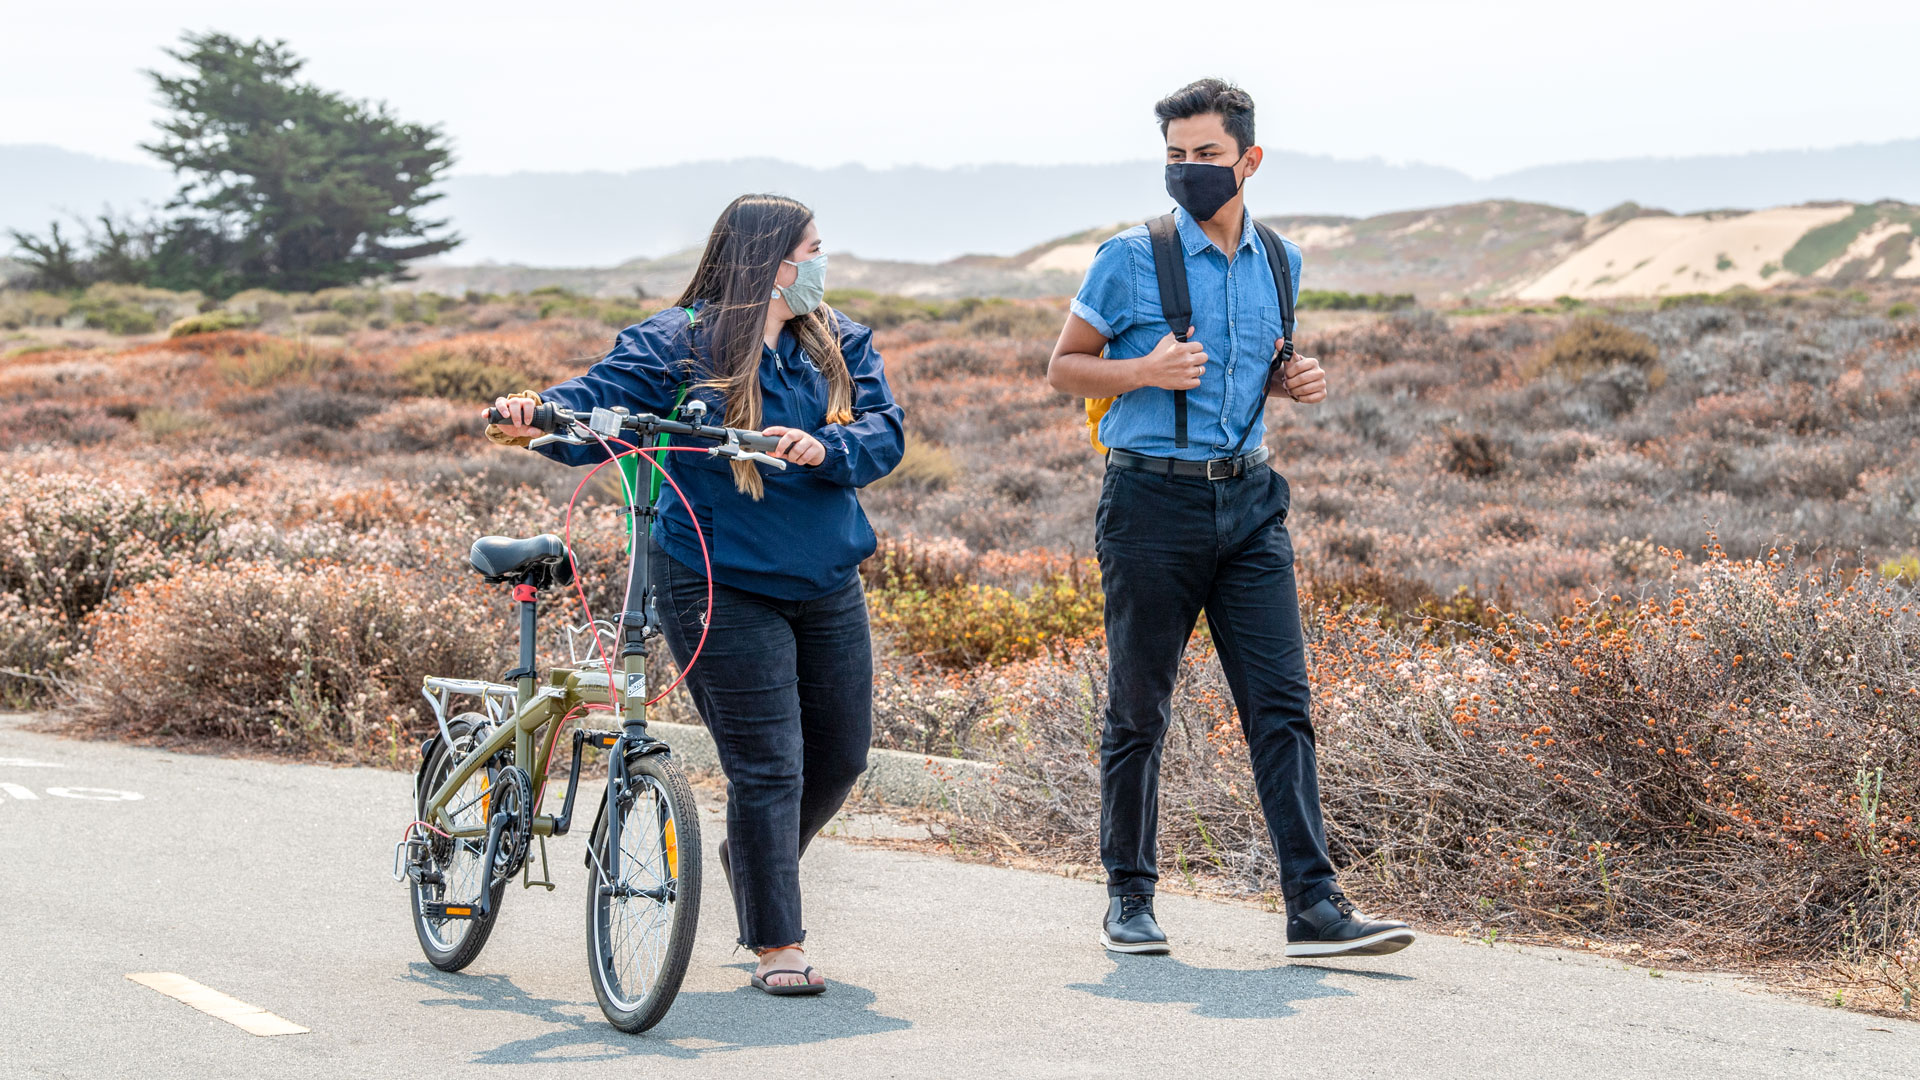 Photo: Students walking through Fort Ord with a bicycle